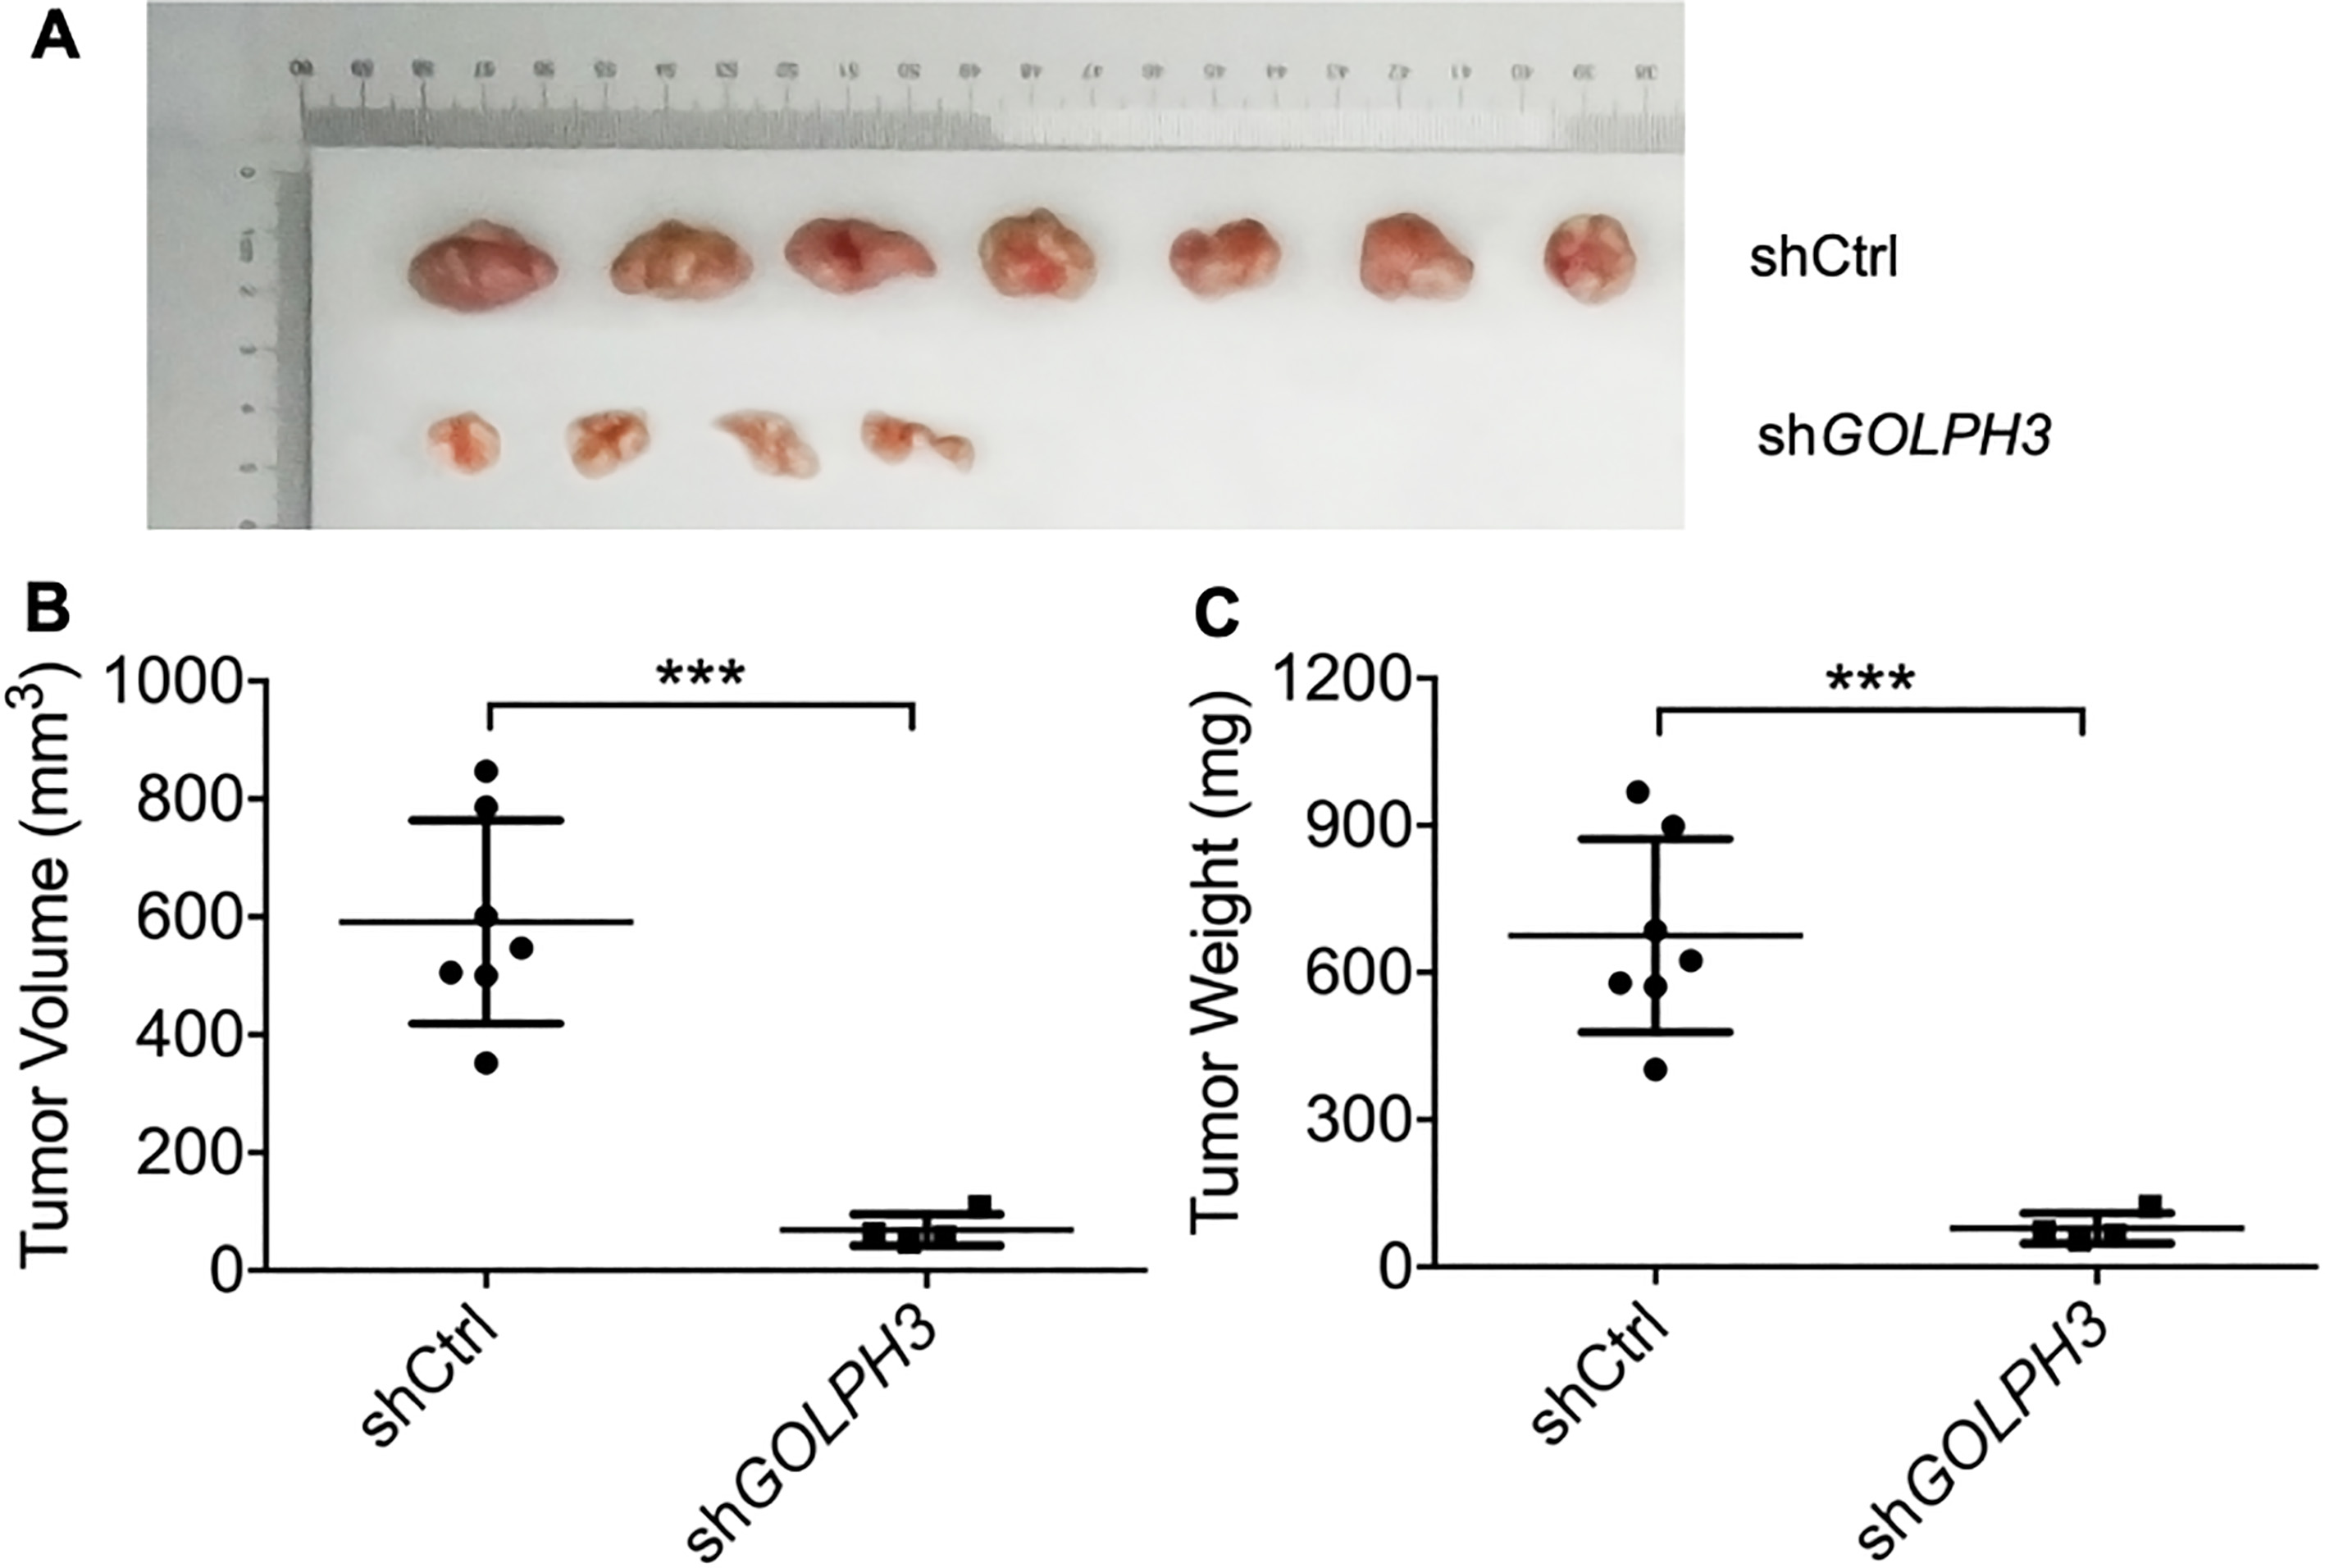 Downregulation of GOLPH3 reduces distant EC cell metastasis in vivo. The tumor images (A), tumor volume growth curves (B) and tumor weights (C) 30 days after inoculation of nude mice with GOLPH3 knockdown (KLE-shGOLPH3) EC cells or control cells. All values are the mean ± SD of three independent experiments. P*< 0.05, P**< 0.01.